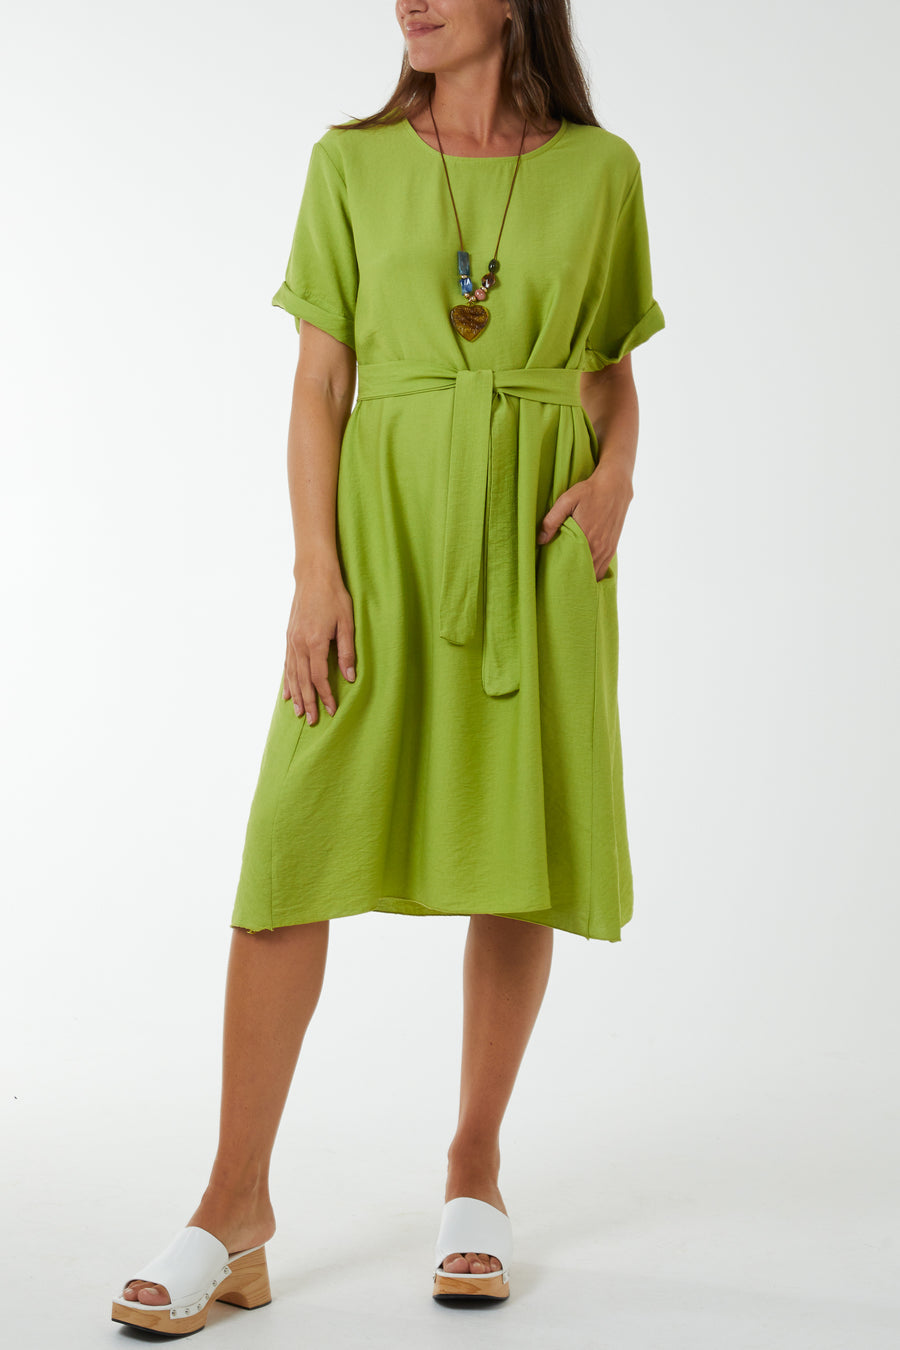 Lime Green Belted Dress with Necklace